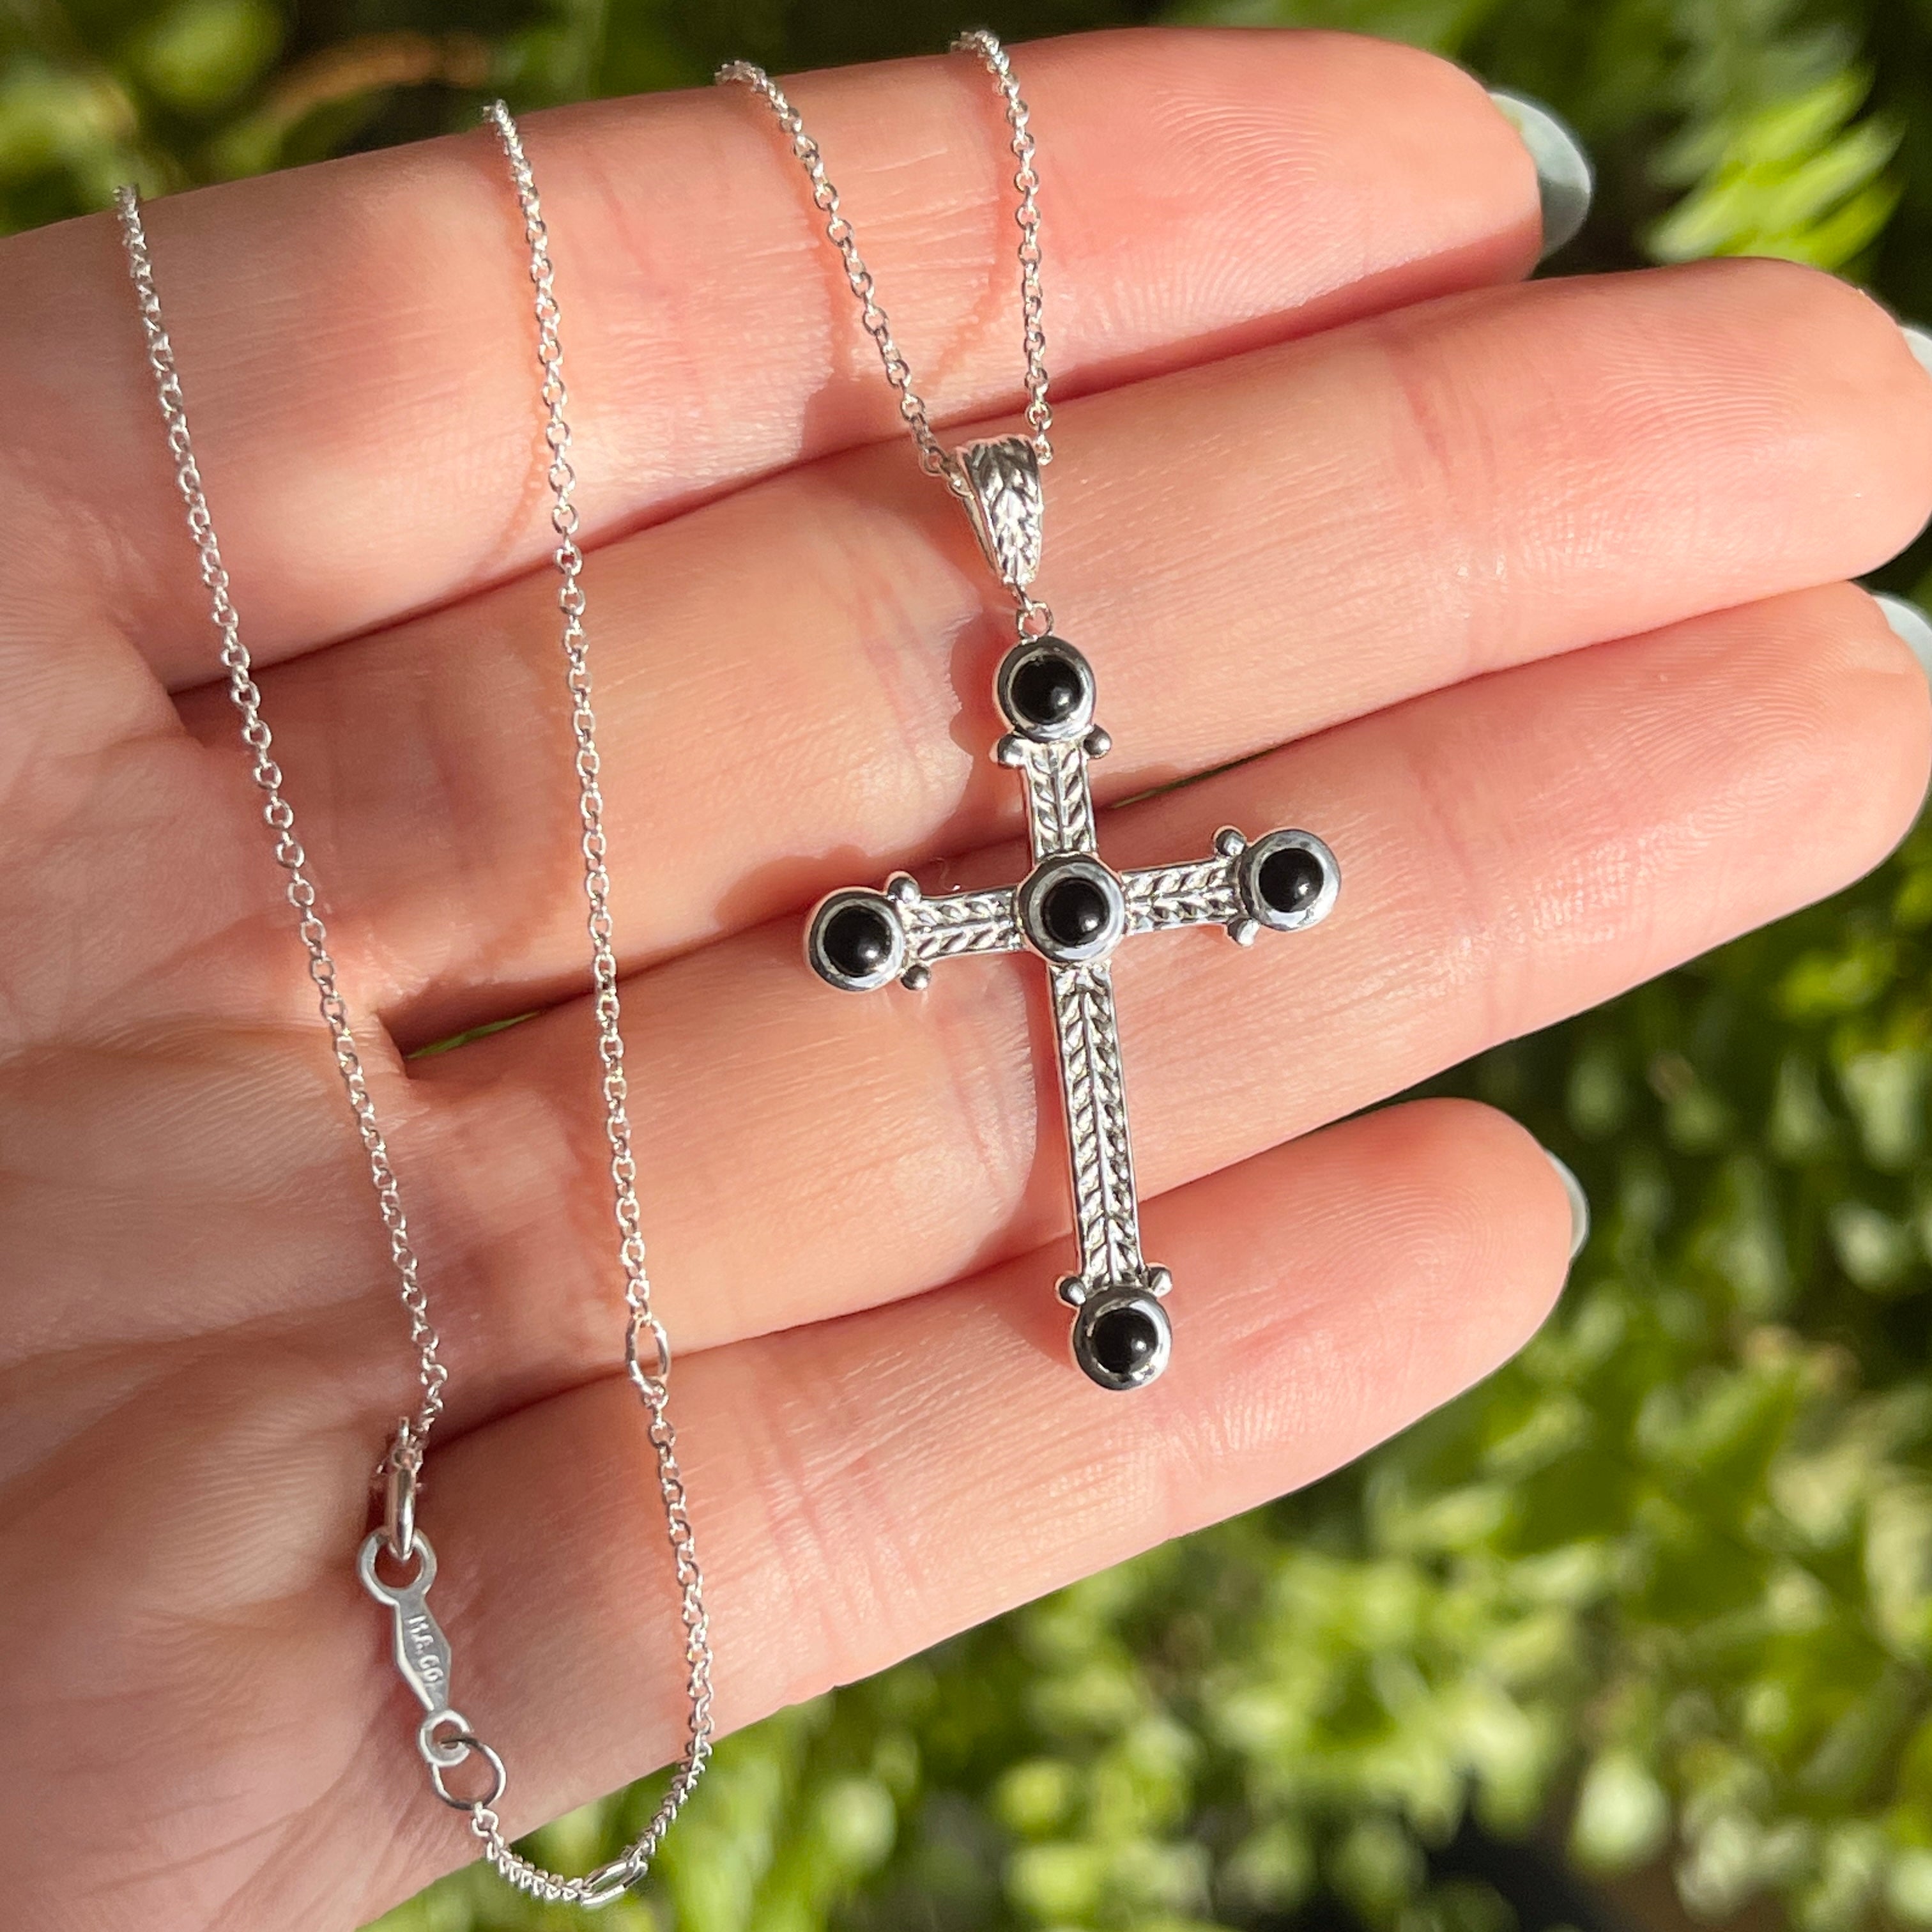 Black, Onyx, Cross, Pendant Necklace, in Sterling Silver, Cameo Pendant  Necklace - Etsy